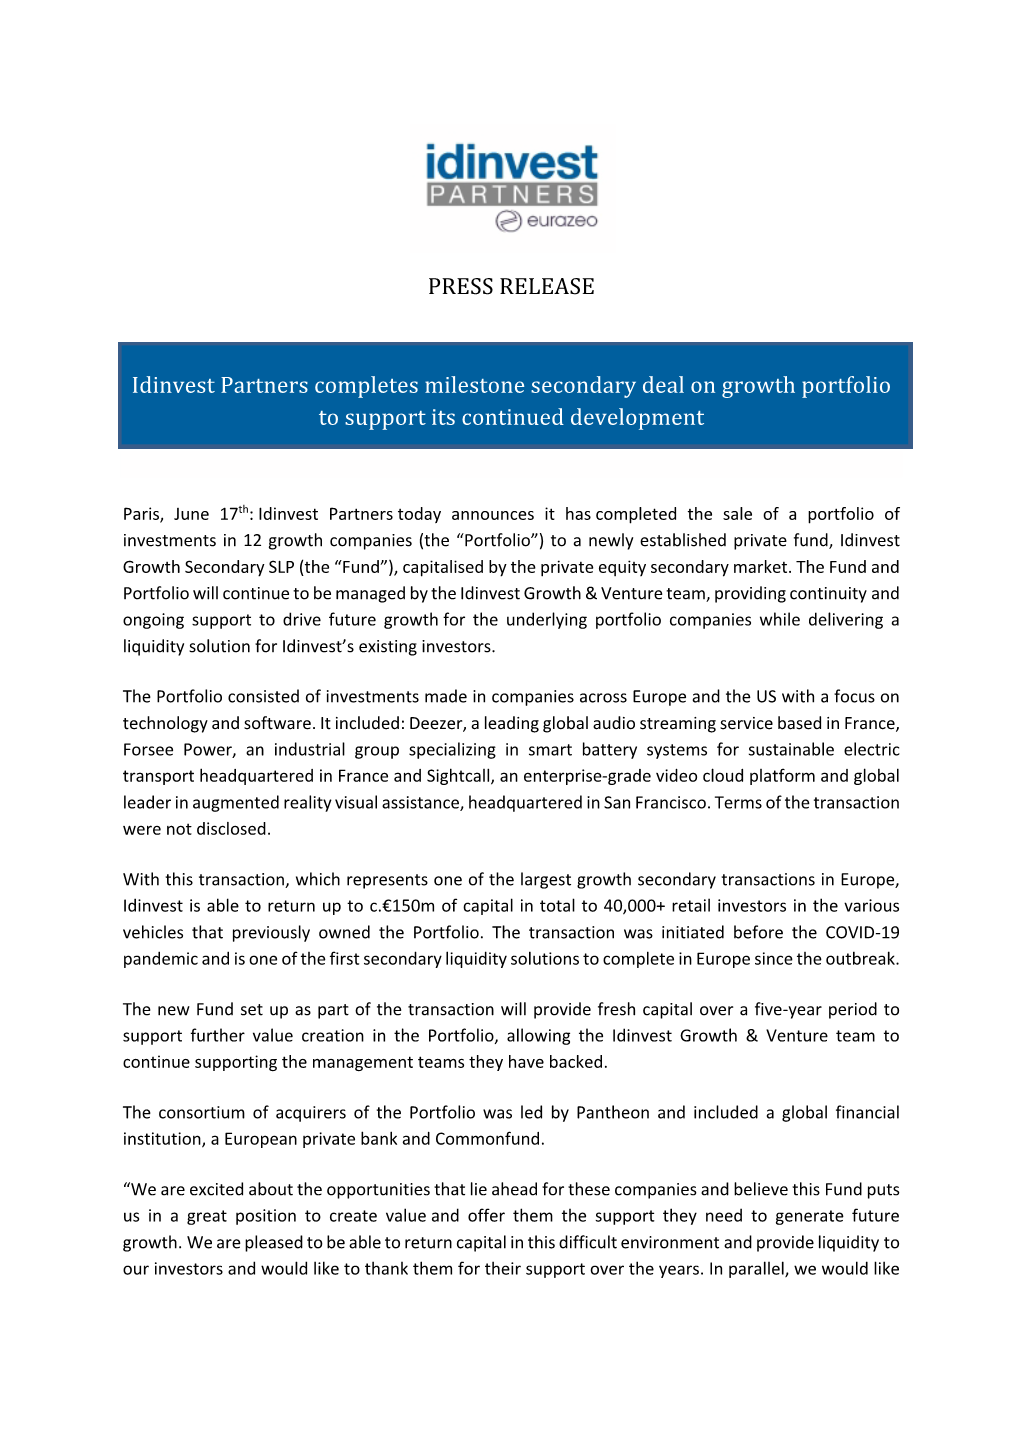 PRESS RELEASE Idinvest Partners Completes Milestone Secondary Deal on Growth Portfolio to Support Its Continued Development